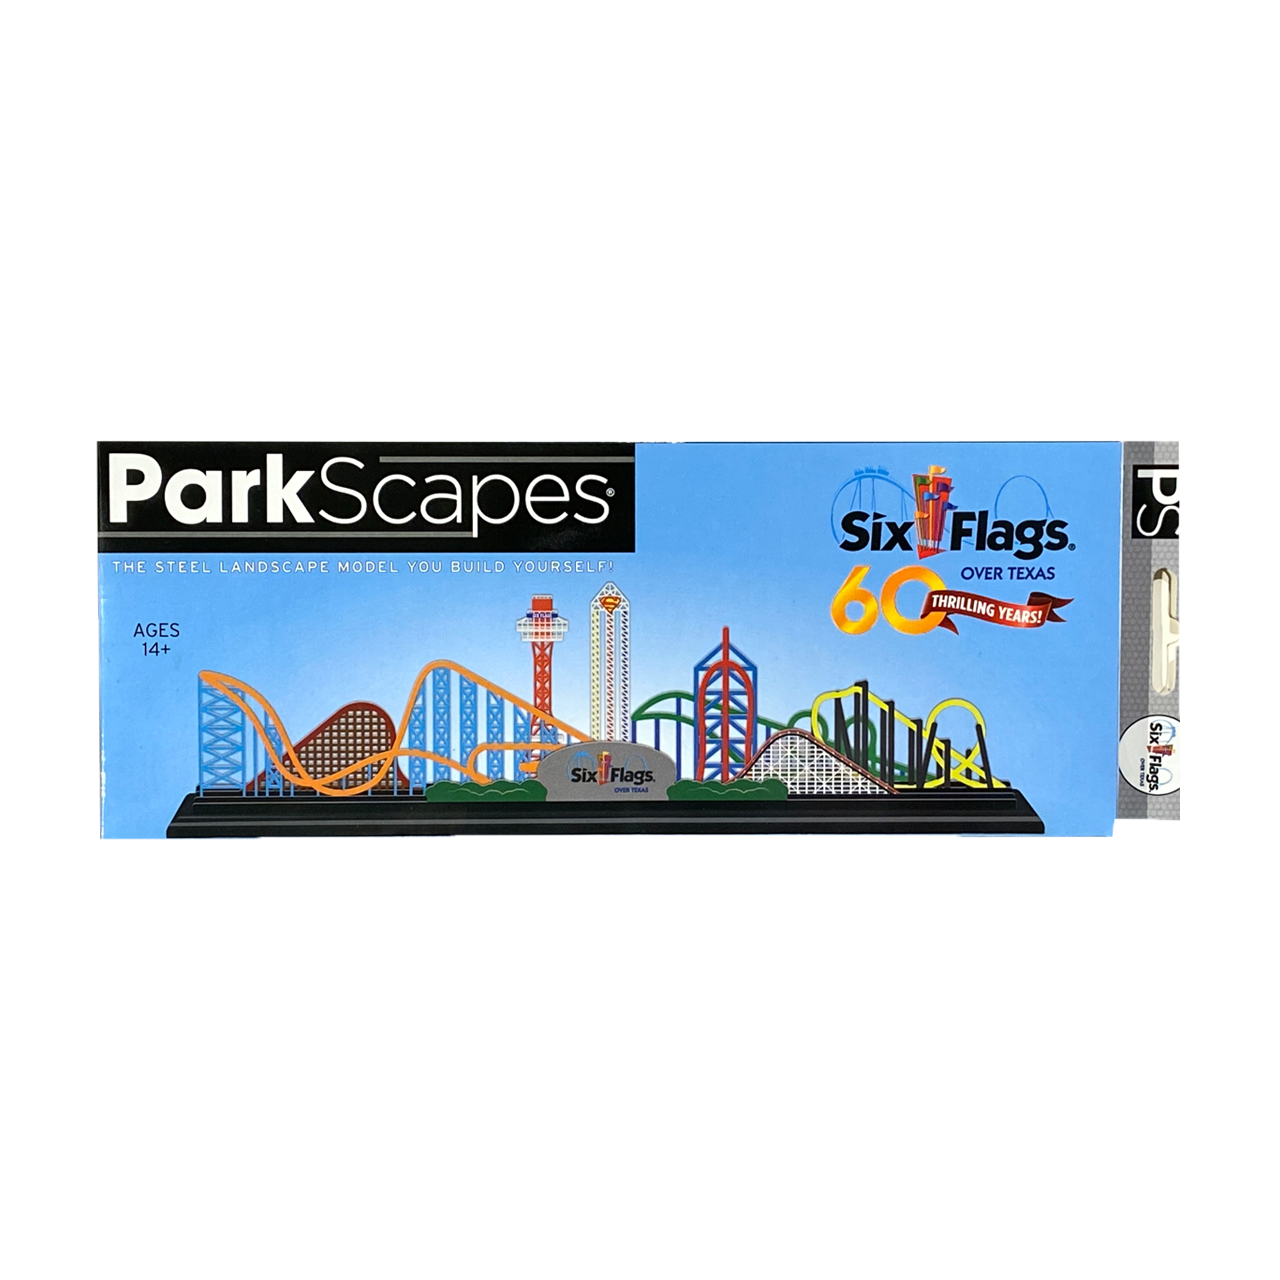 SIX FLAGS PARKSCAPES - SIX FLAGS OVER TEXAS PACKAGE